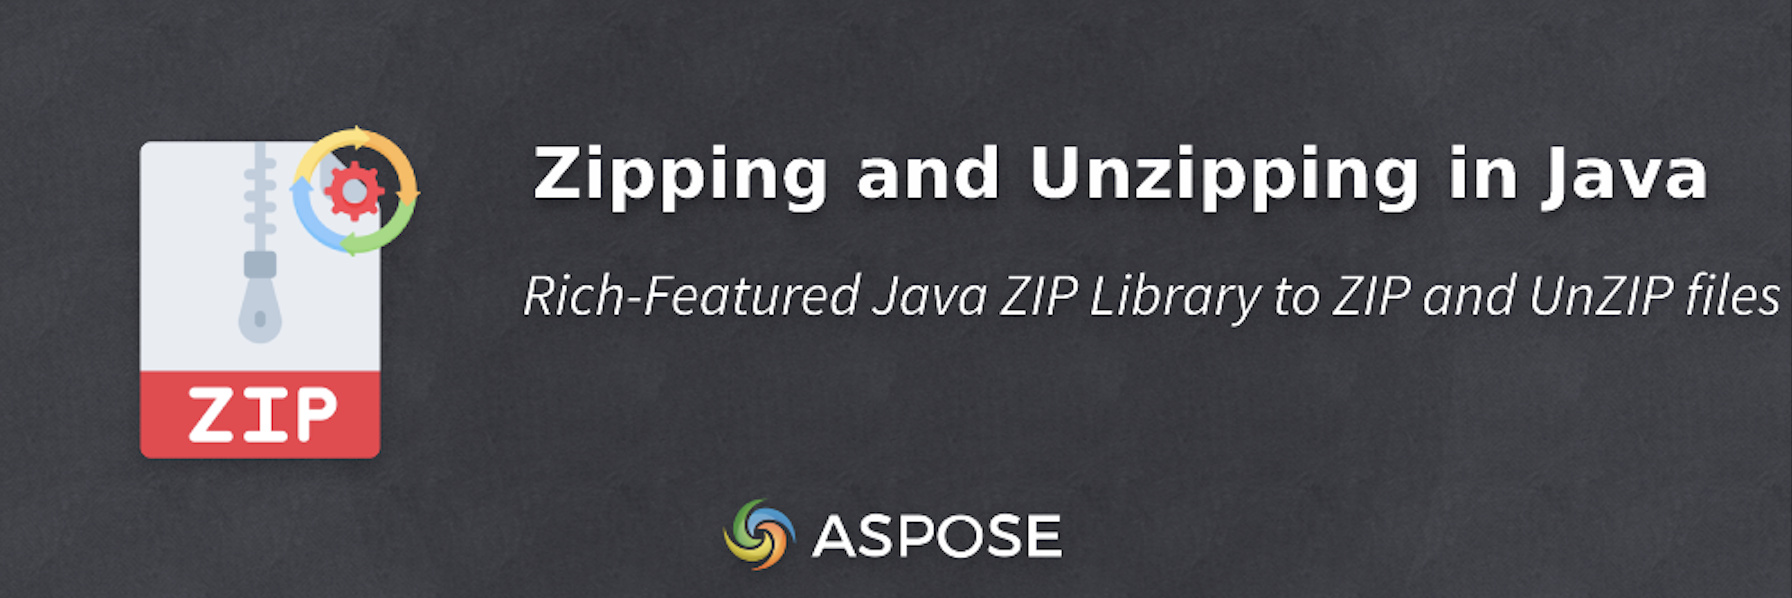 Zipping and Unzipping in Java - Java ZIP Library